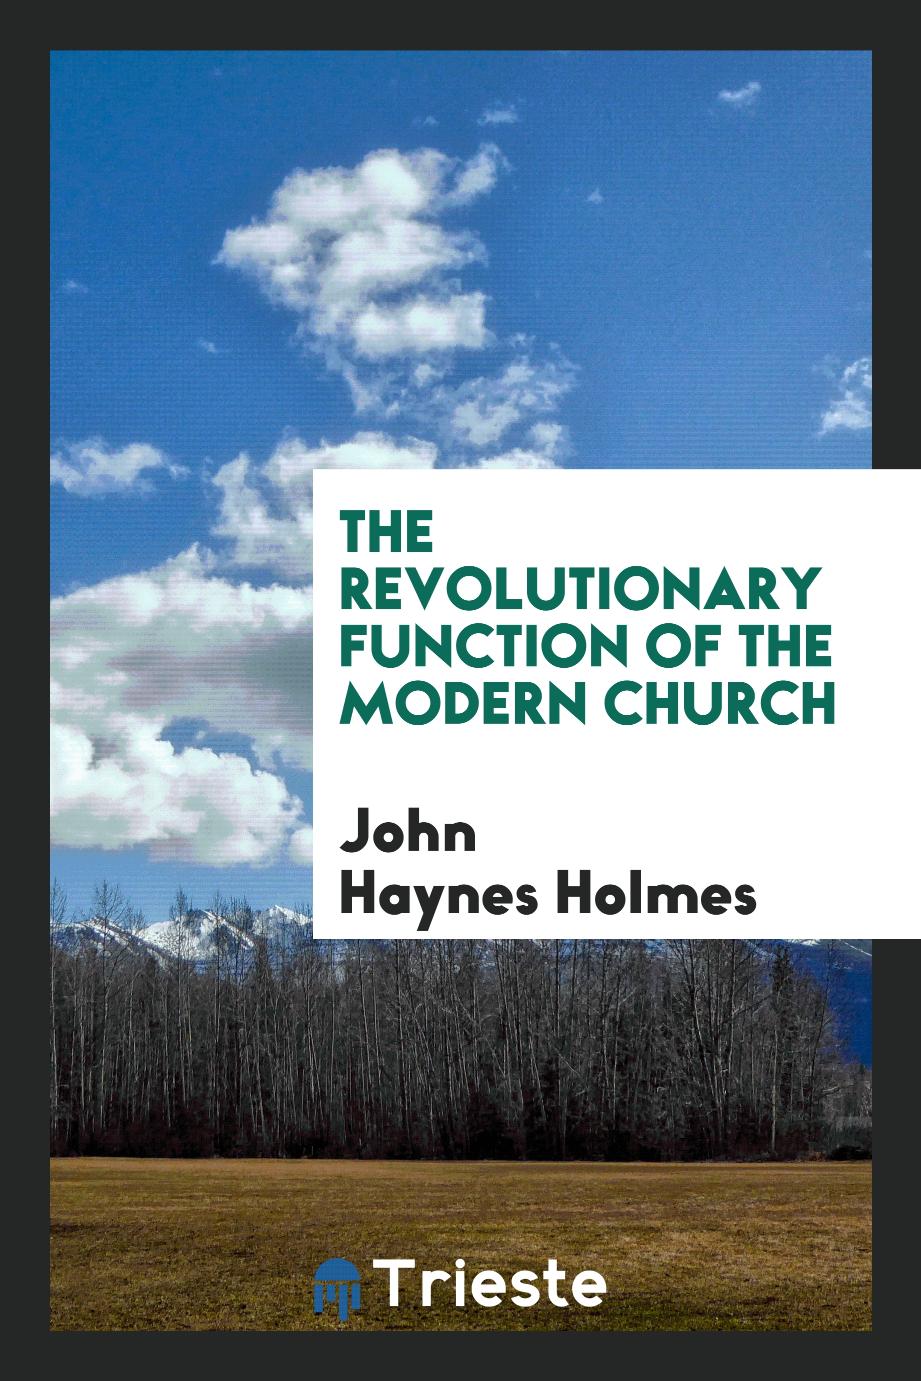 The revolutionary Function of the modern Church